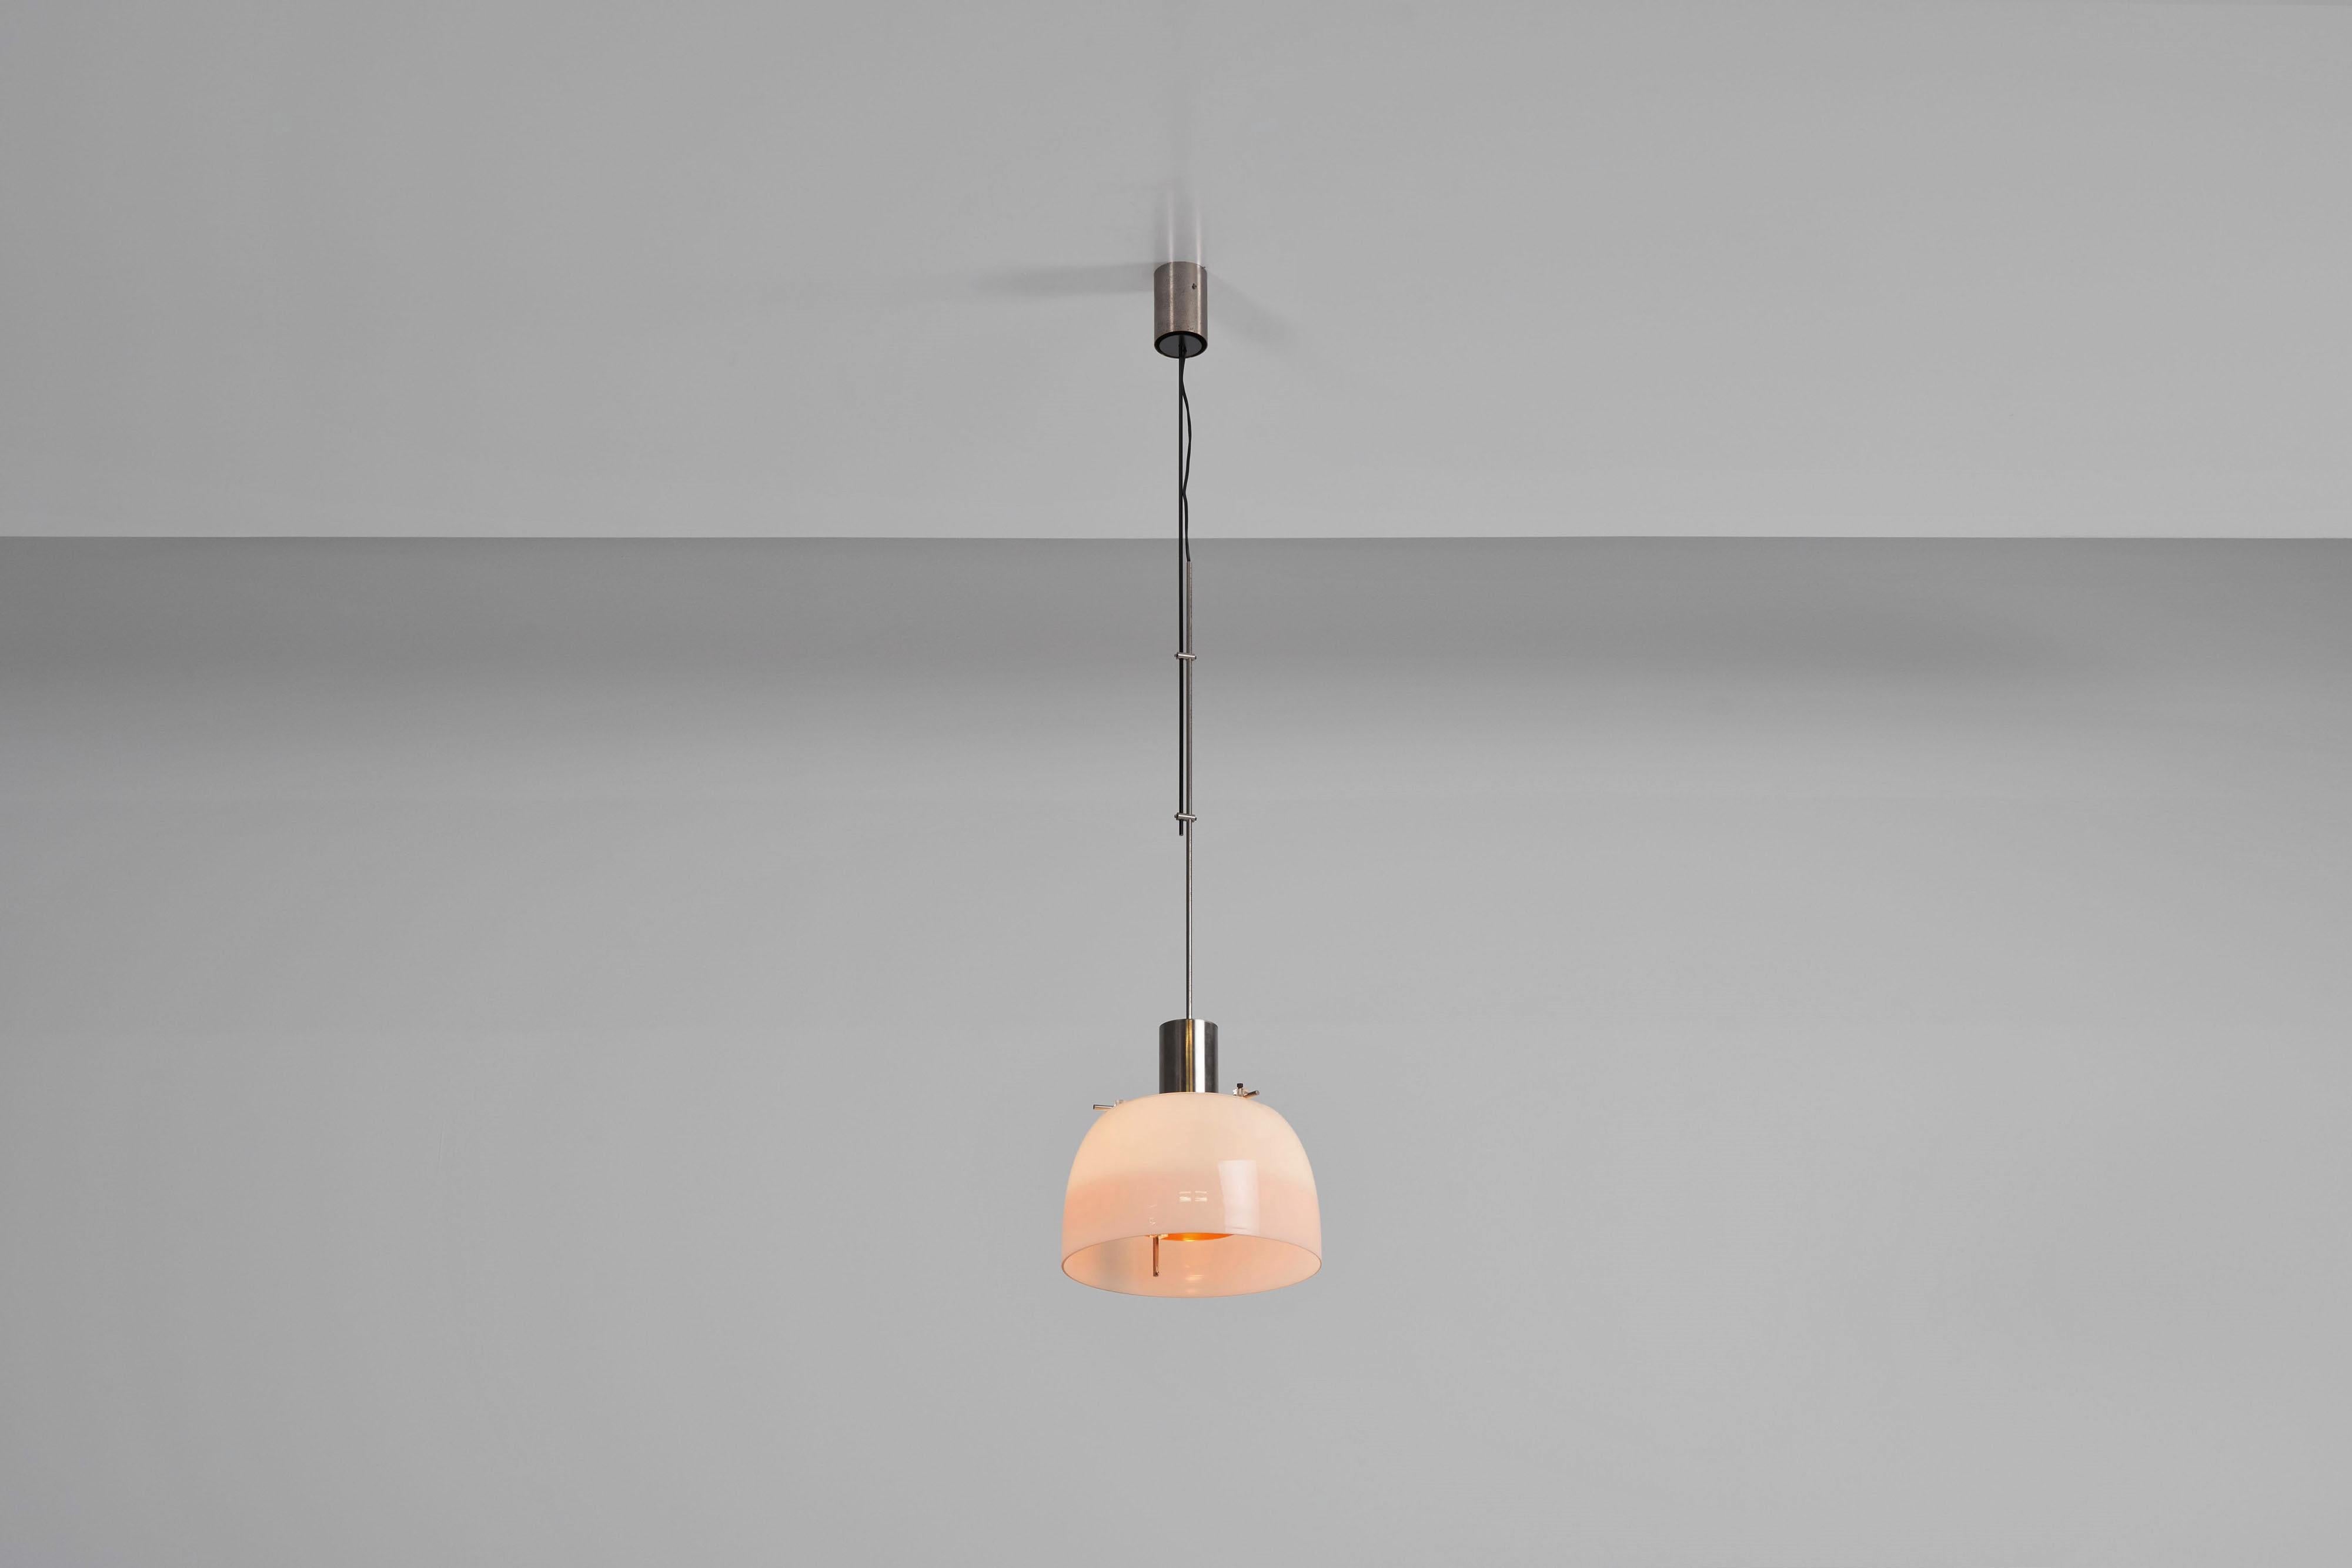 This amazing, in very good original condition, model 4437 pendant lamp designed by Giuseppe Ostuni and Renato Forti in Italy in 1961, is a true masterpiece of lighting design. This iconic lamp showcases a harmonious combination of materials,